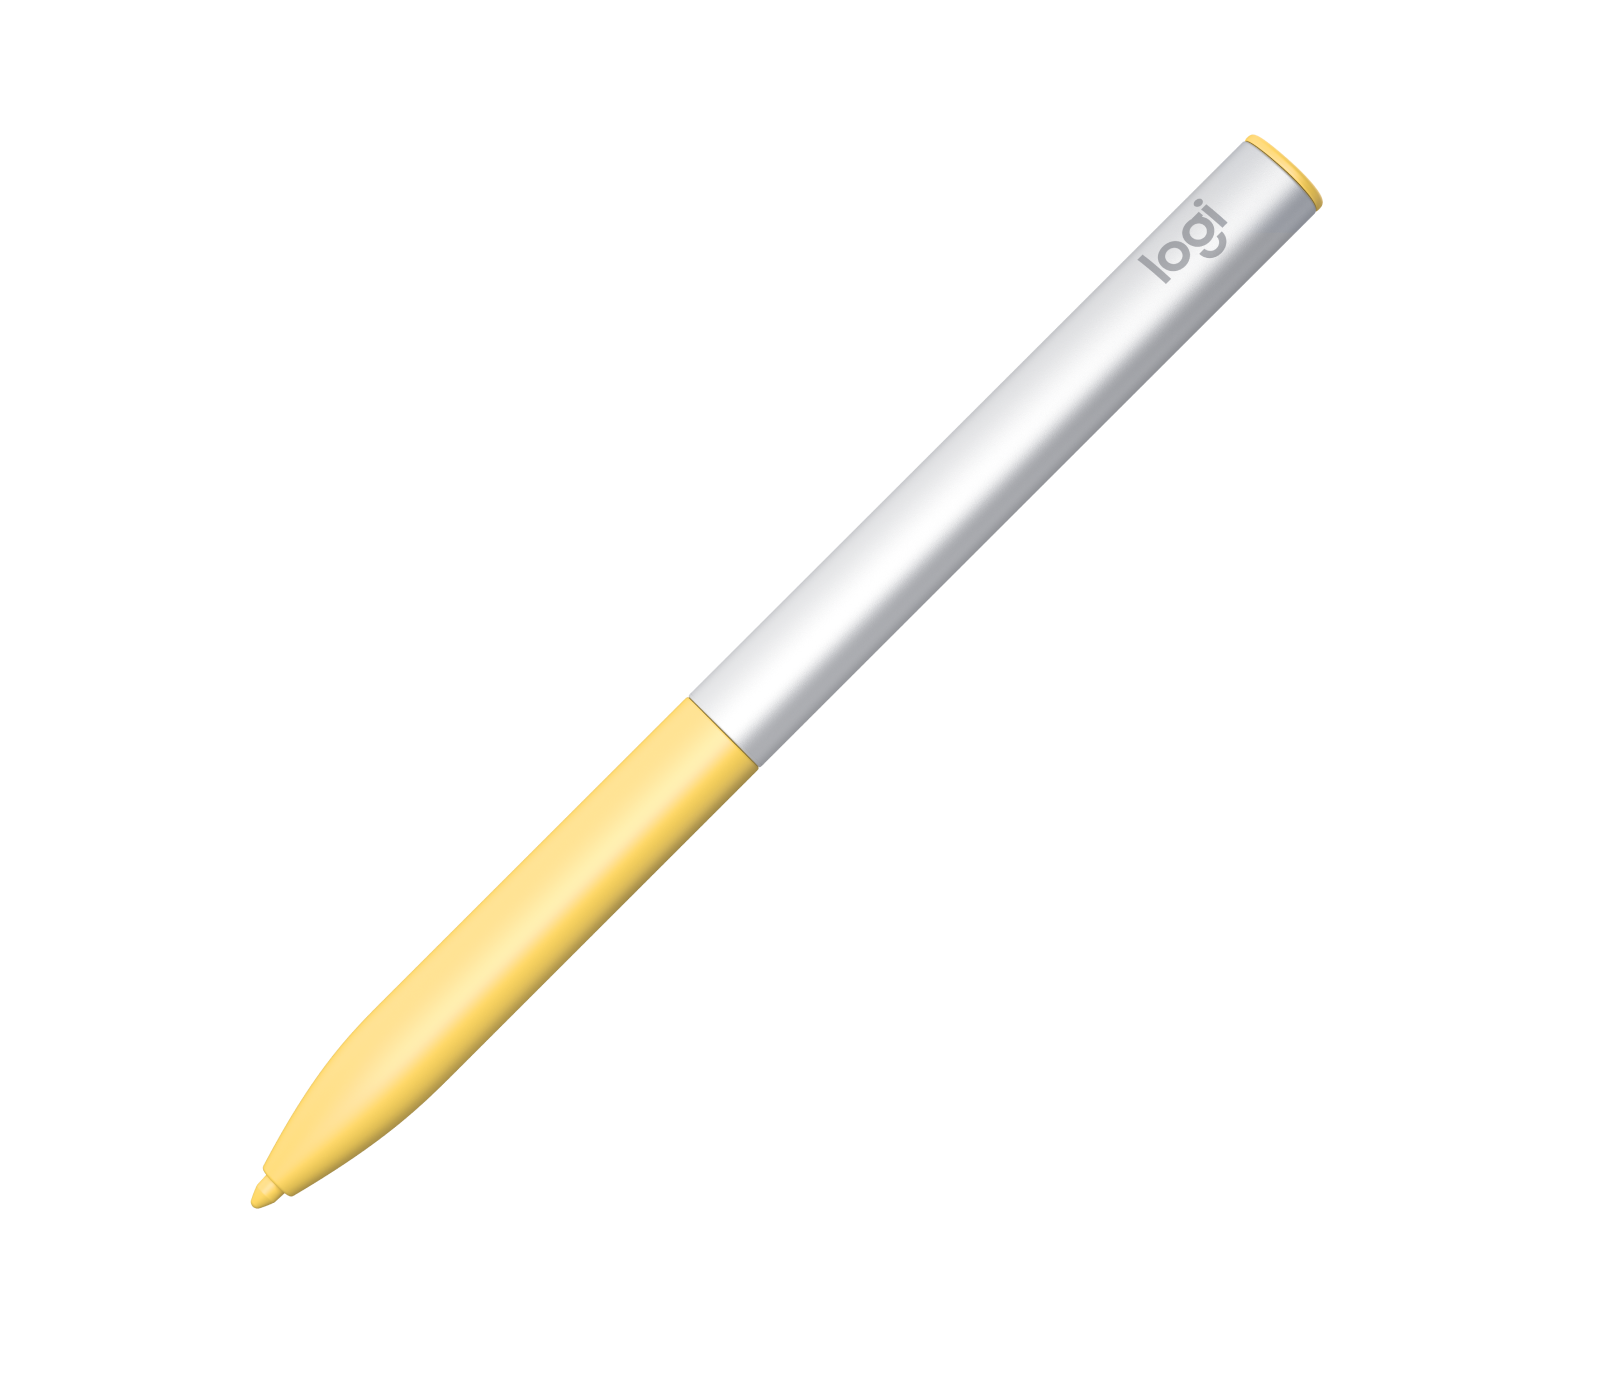 Lenovo Rechargeable USI Pen for C13 Yoga